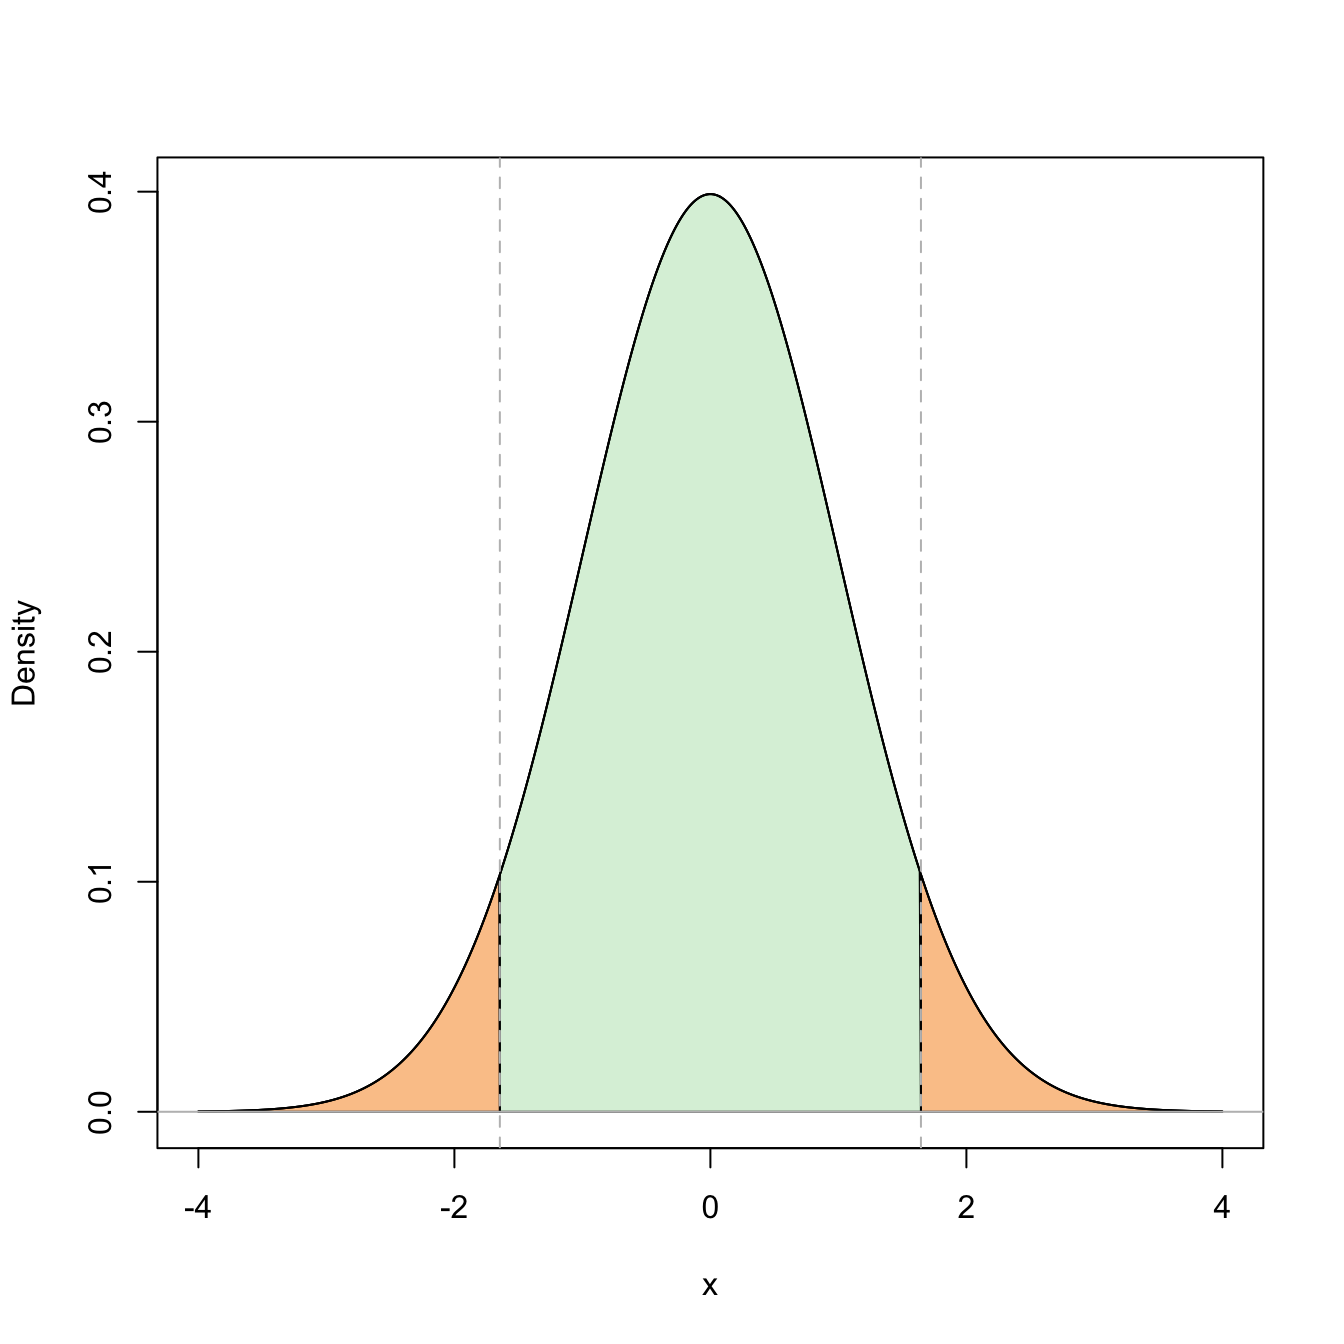 Representation of the probability \(\mathbb{P}(-z_{\alpha/2}\leq Z\leq z_{\alpha/2})=1-\alpha\) (in green) and its complementary (in orange) for \(\alpha=0.10\).